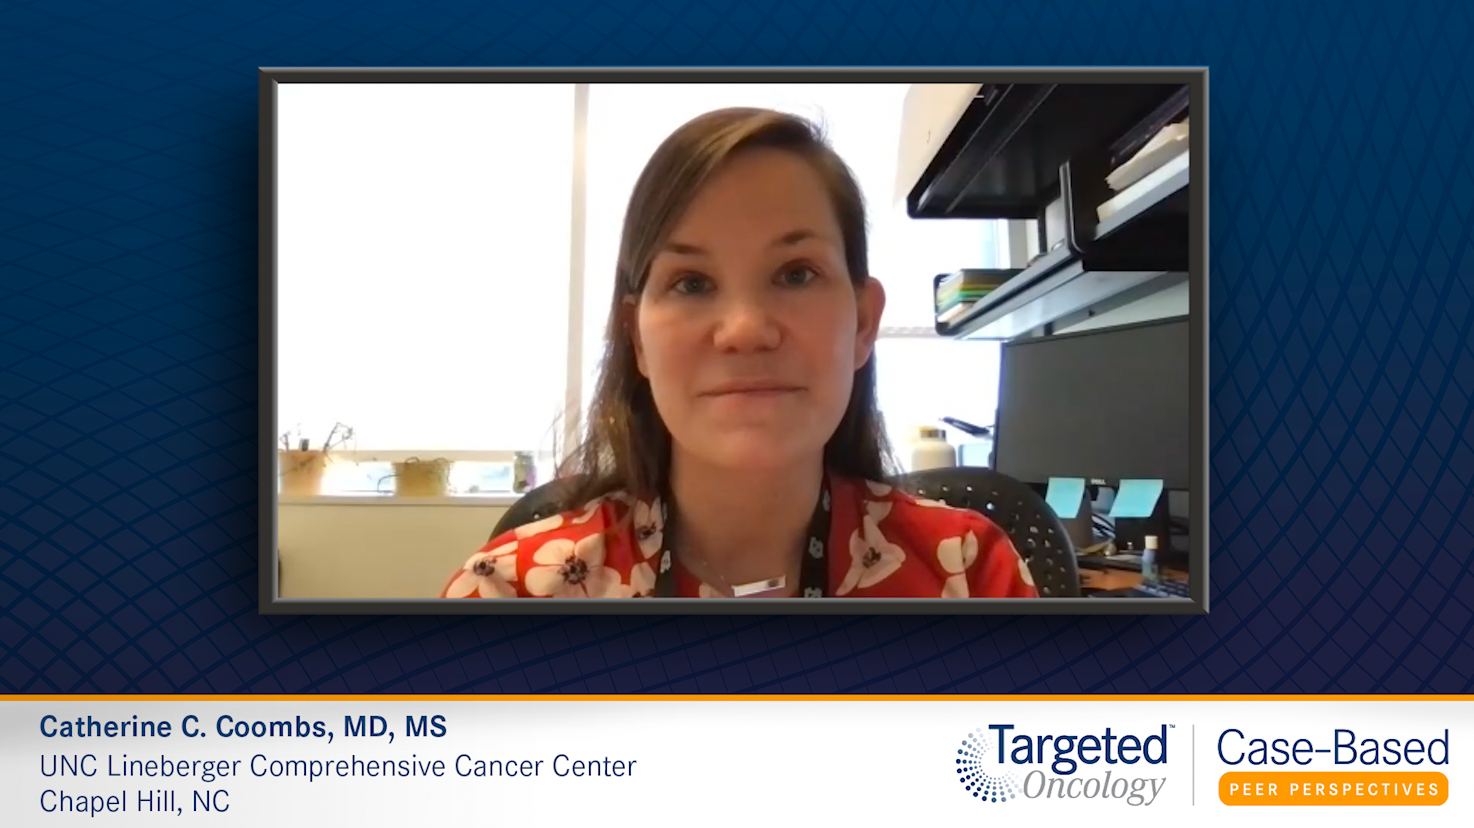 Initial Impression and Prognosis of a Patient with R/R CLL